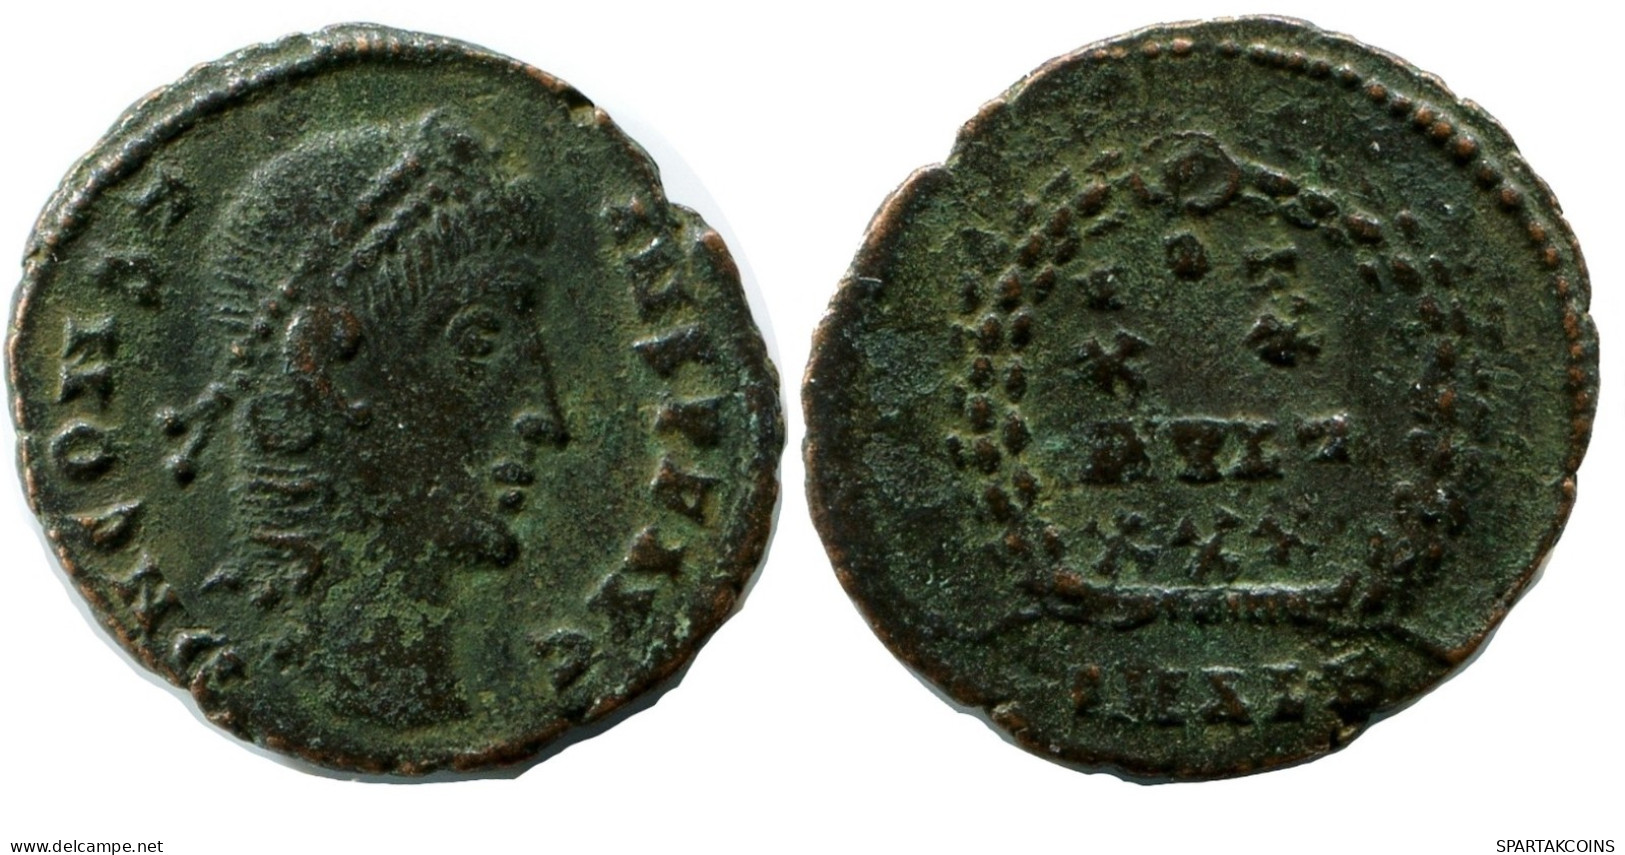 CONSTANS MINTED IN ALEKSANDRIA FROM THE ROYAL ONTARIO MUSEUM #ANC11365.14.E.A - The Christian Empire (307 AD To 363 AD)